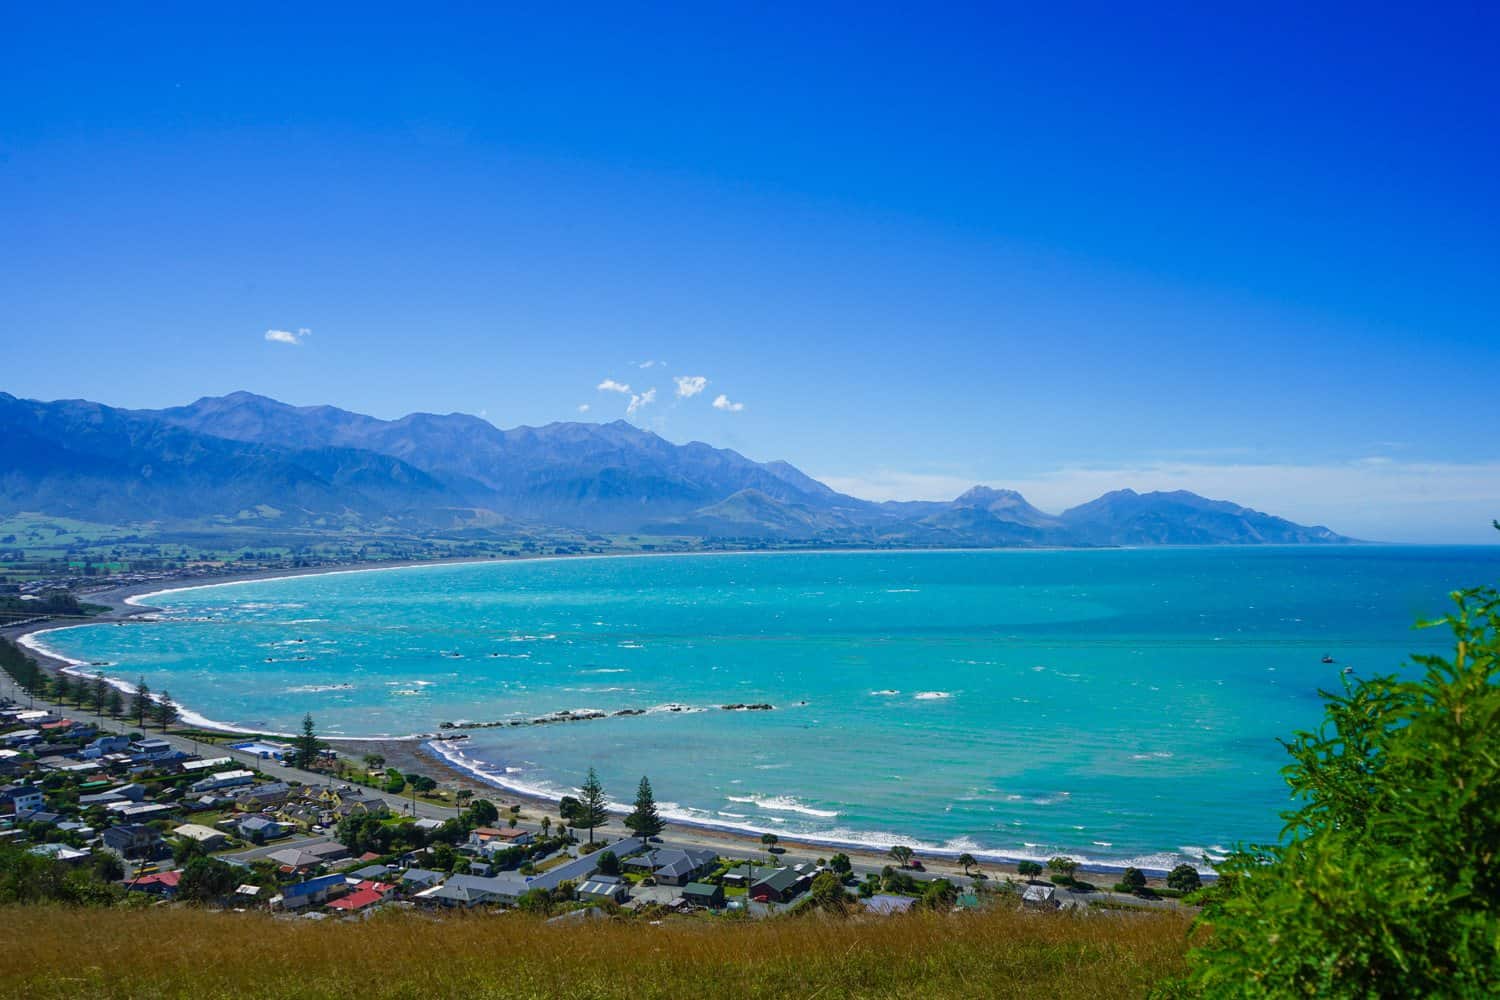 Sweeping view of Kaikoura, New Zealand, from a hillside at one end of town, overlooking the large bay, houses, and mountains in the distance.